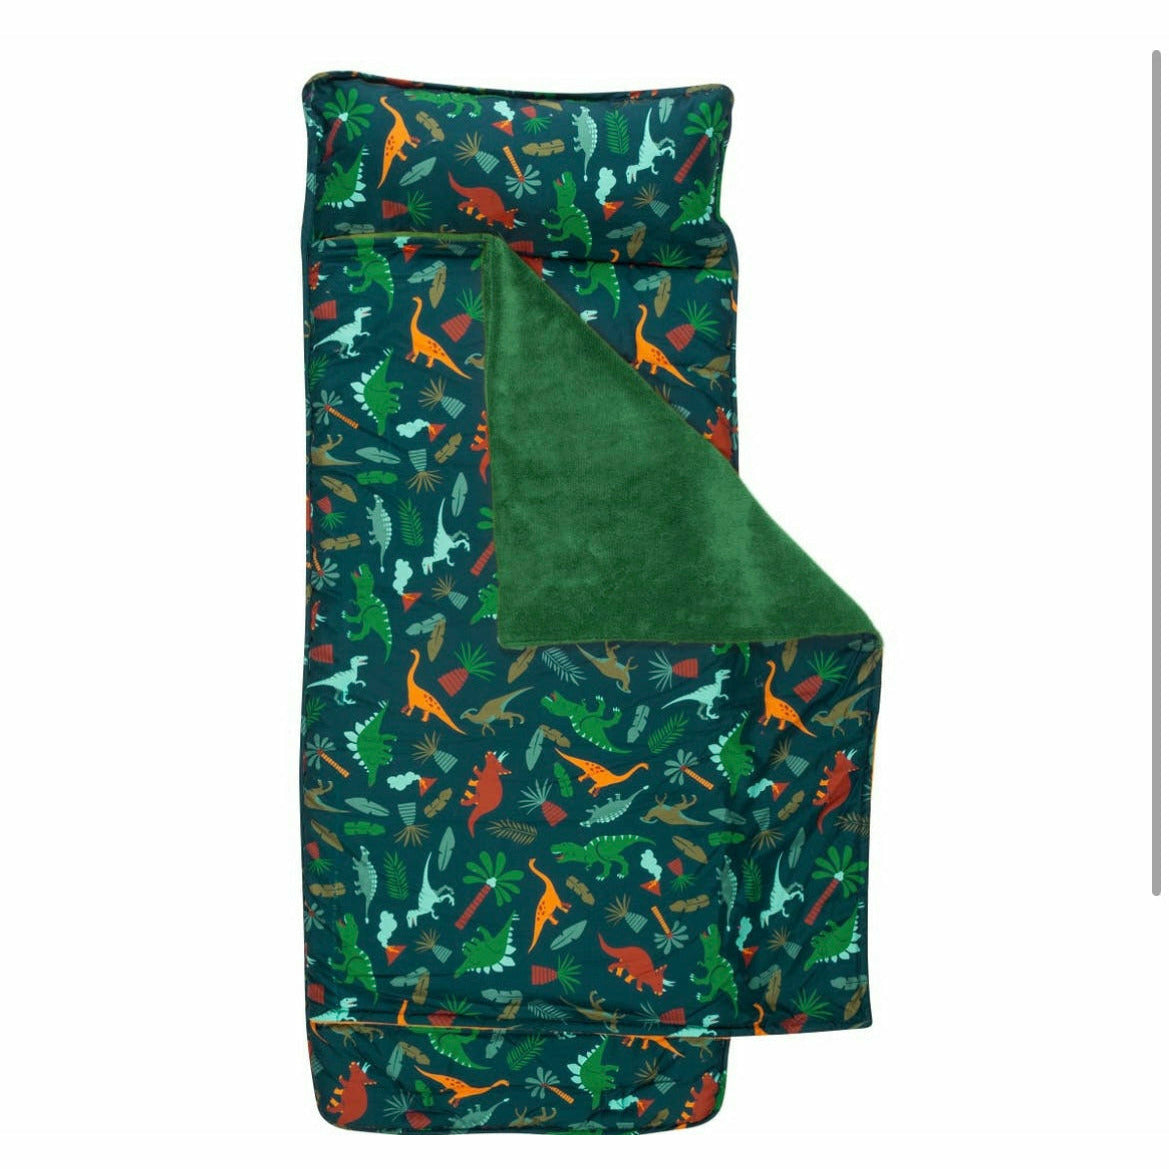 Buy dinosaurs Printed All Over Nap Mat